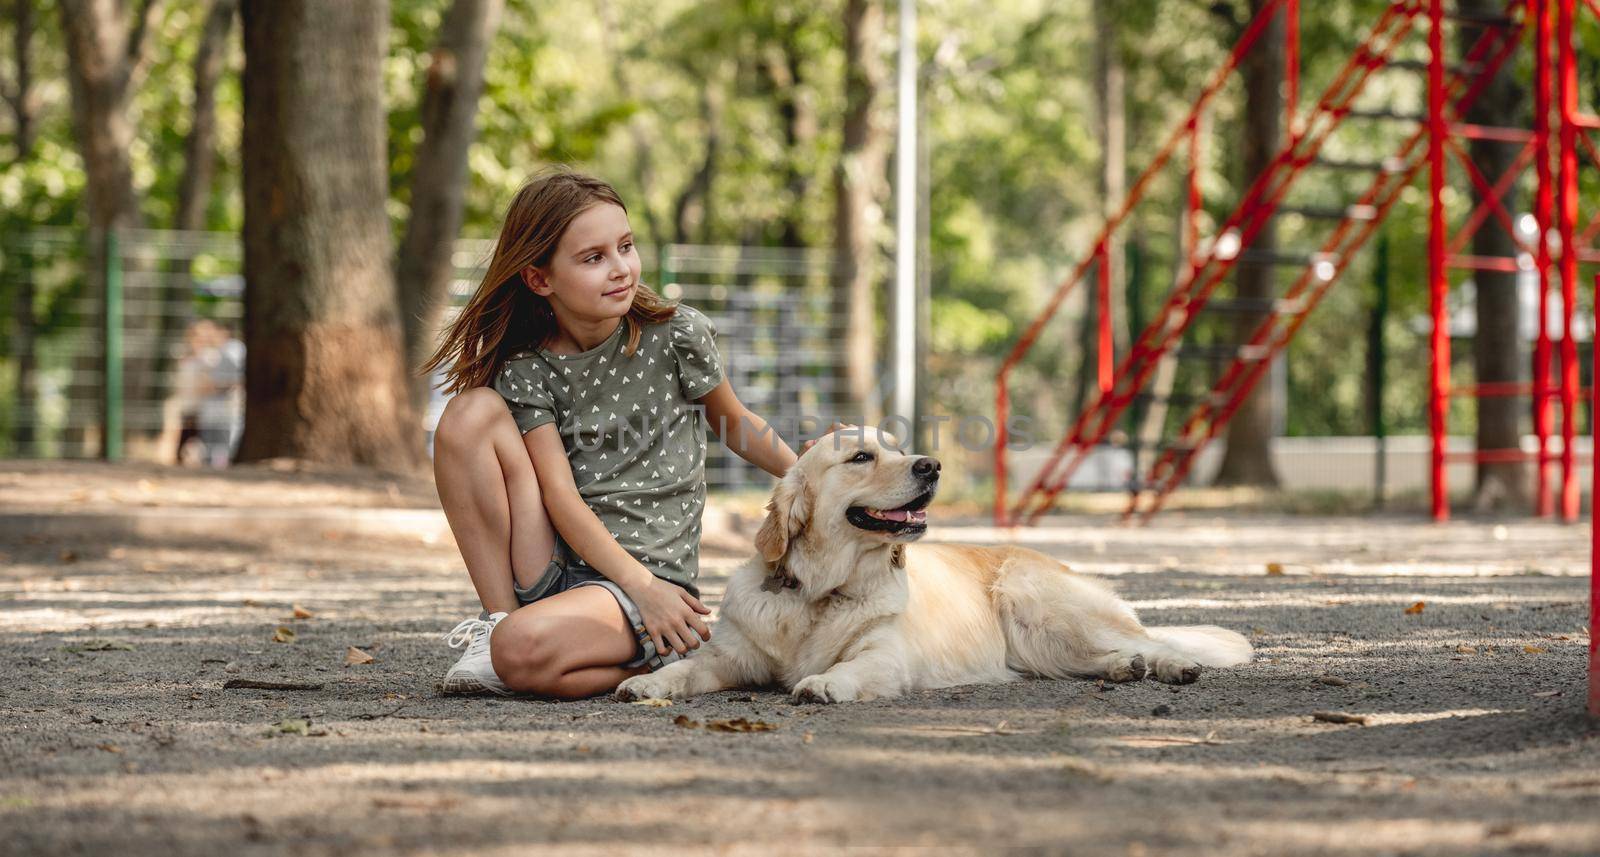 Preteen girl with golden retriever dog sitting on the earth in the park. Cute child with doggy pet portrait outdoors